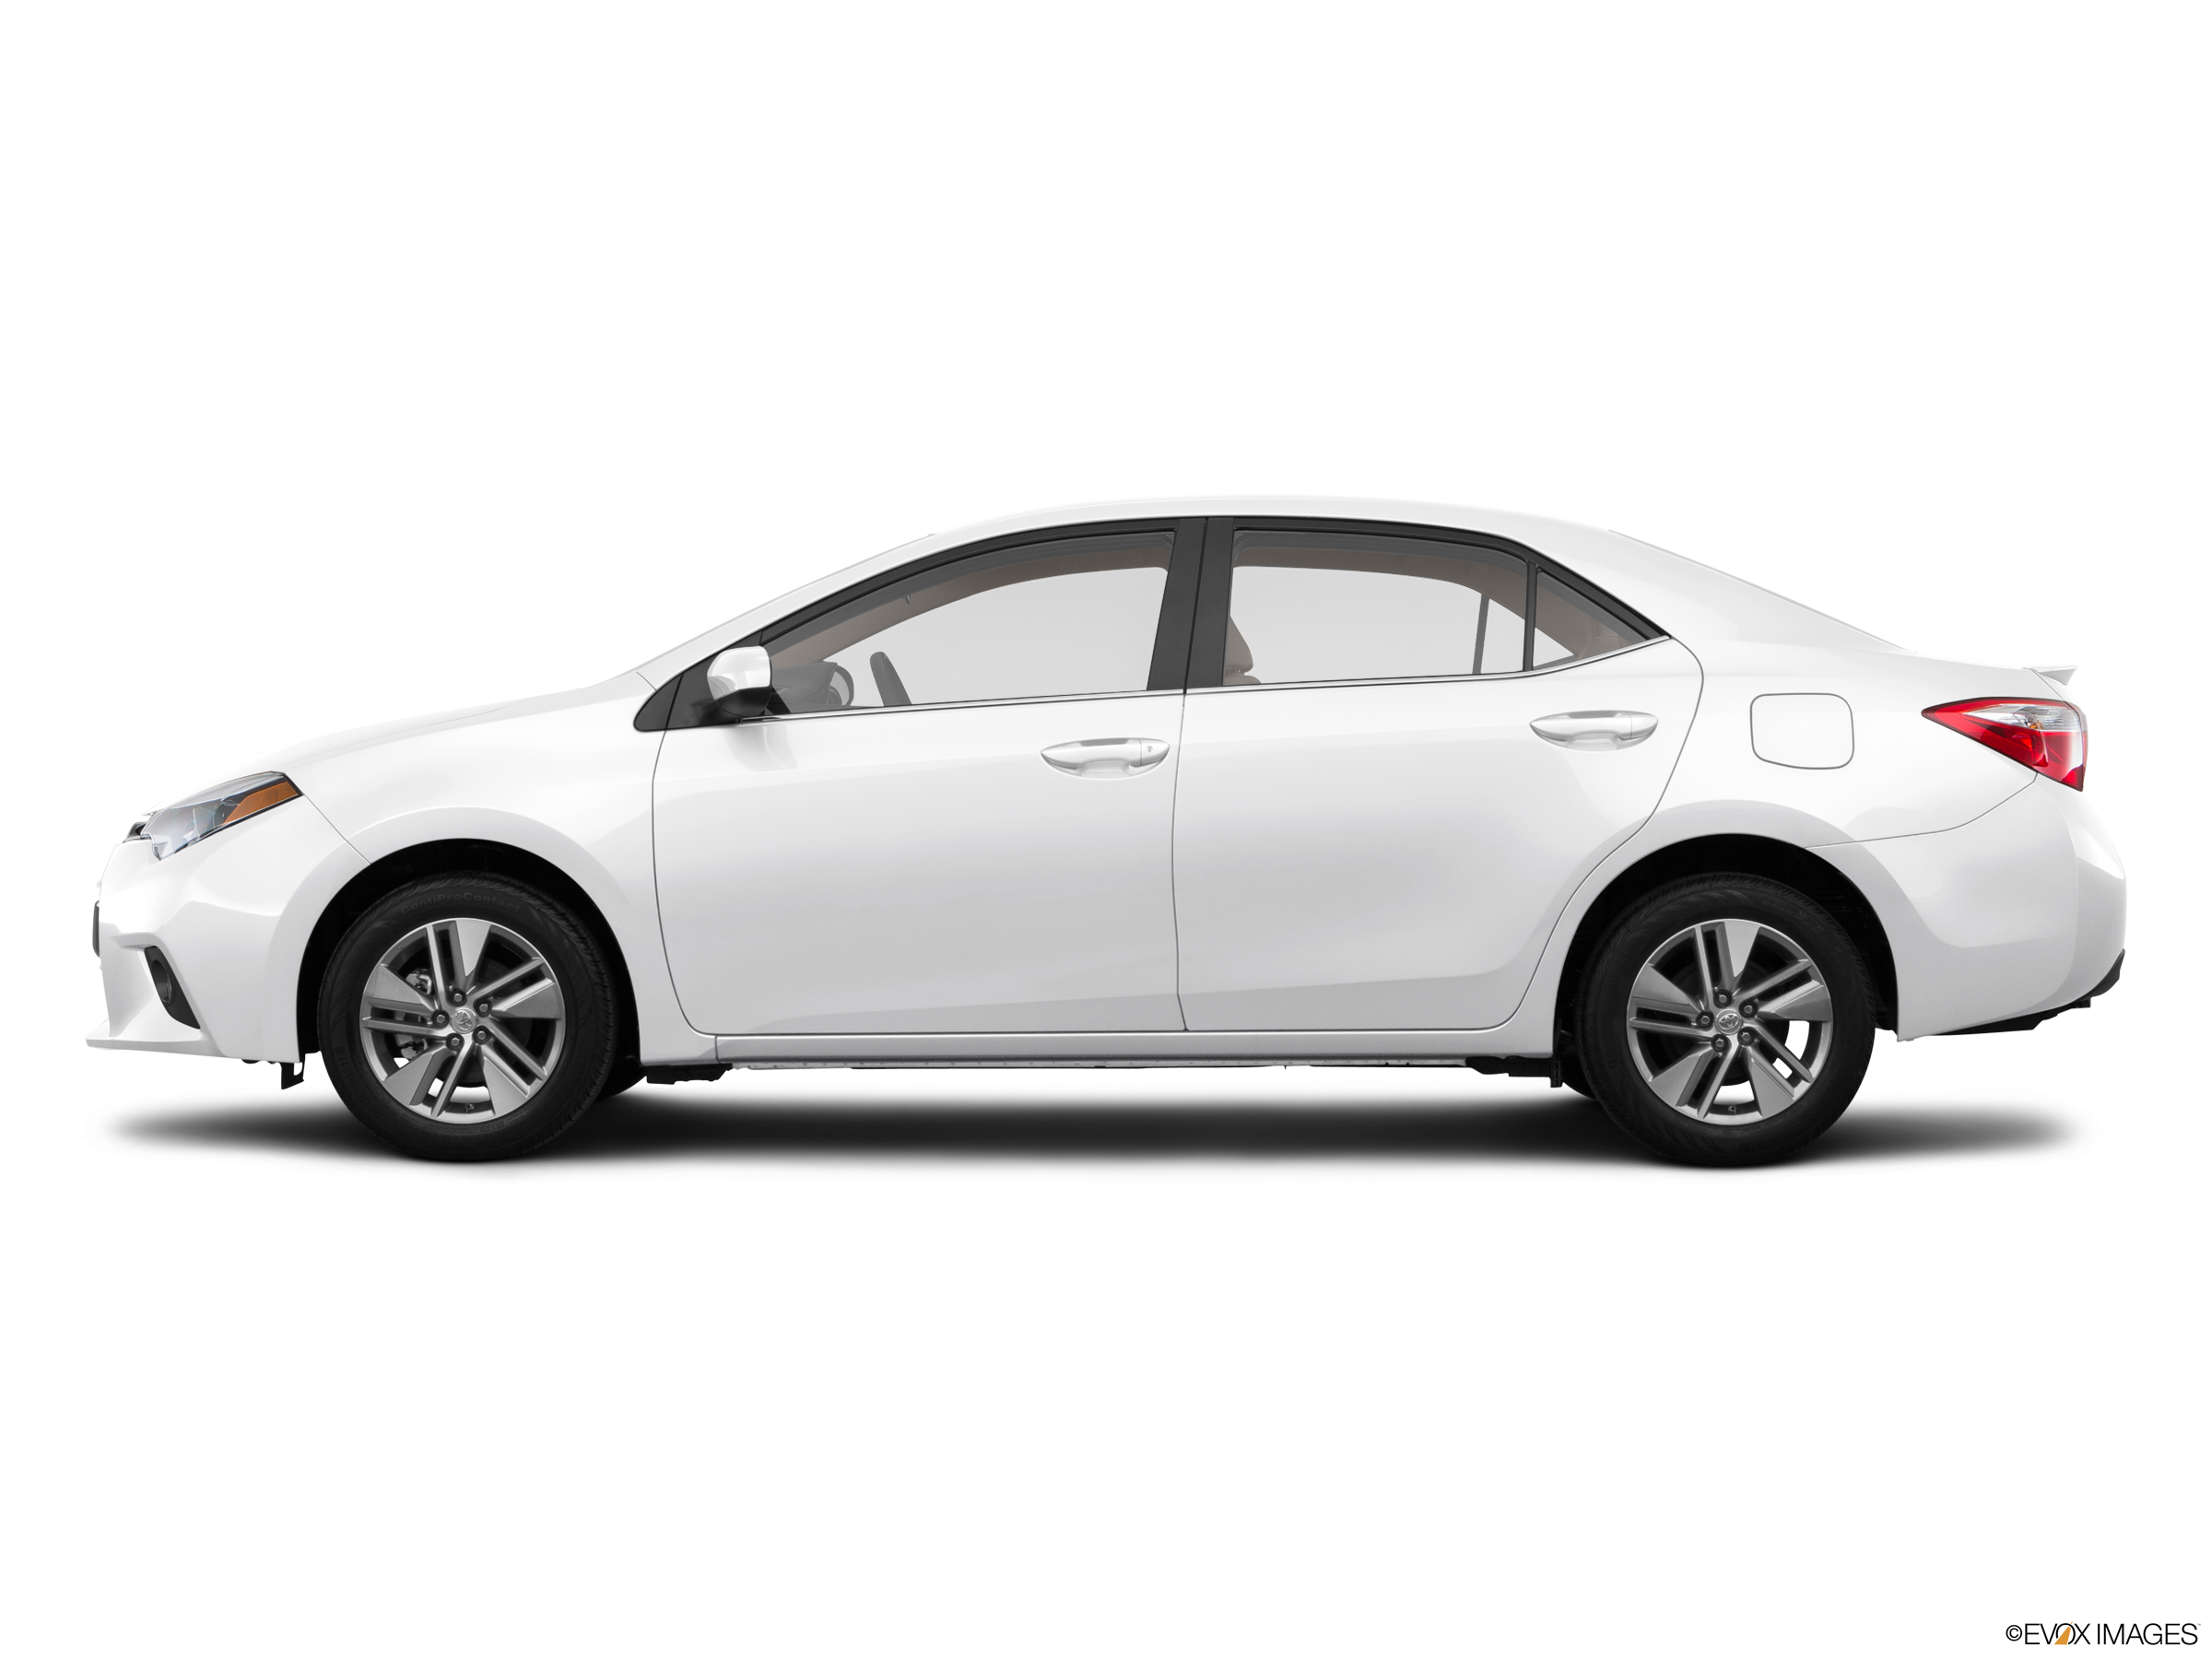 Tip 83+ about 2015 toyota corolla value latest - in.daotaonec